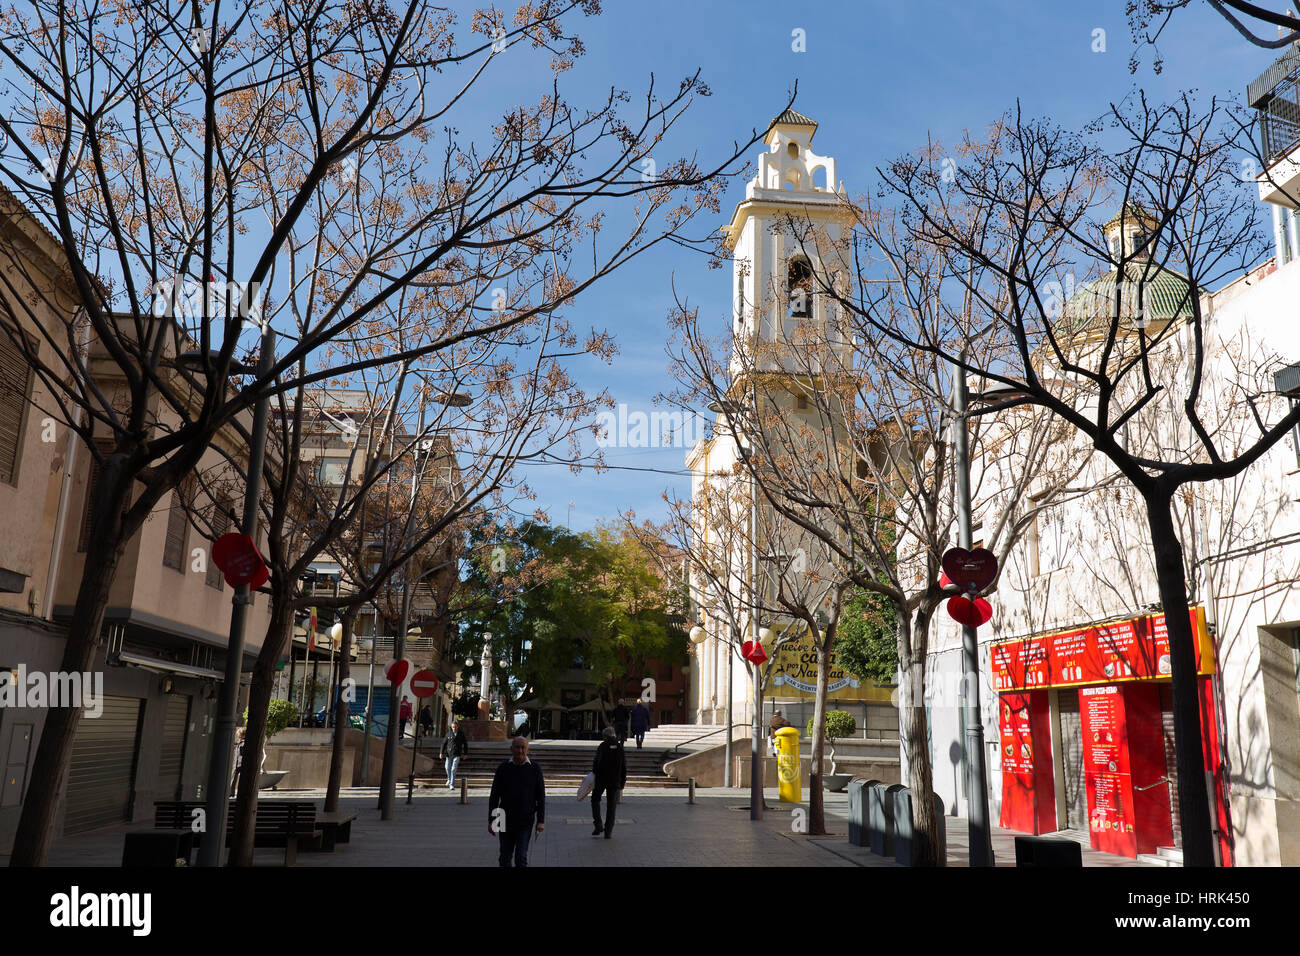 San Vicente Del Raspeig High Resolution Stock Photography and Images - Alamy